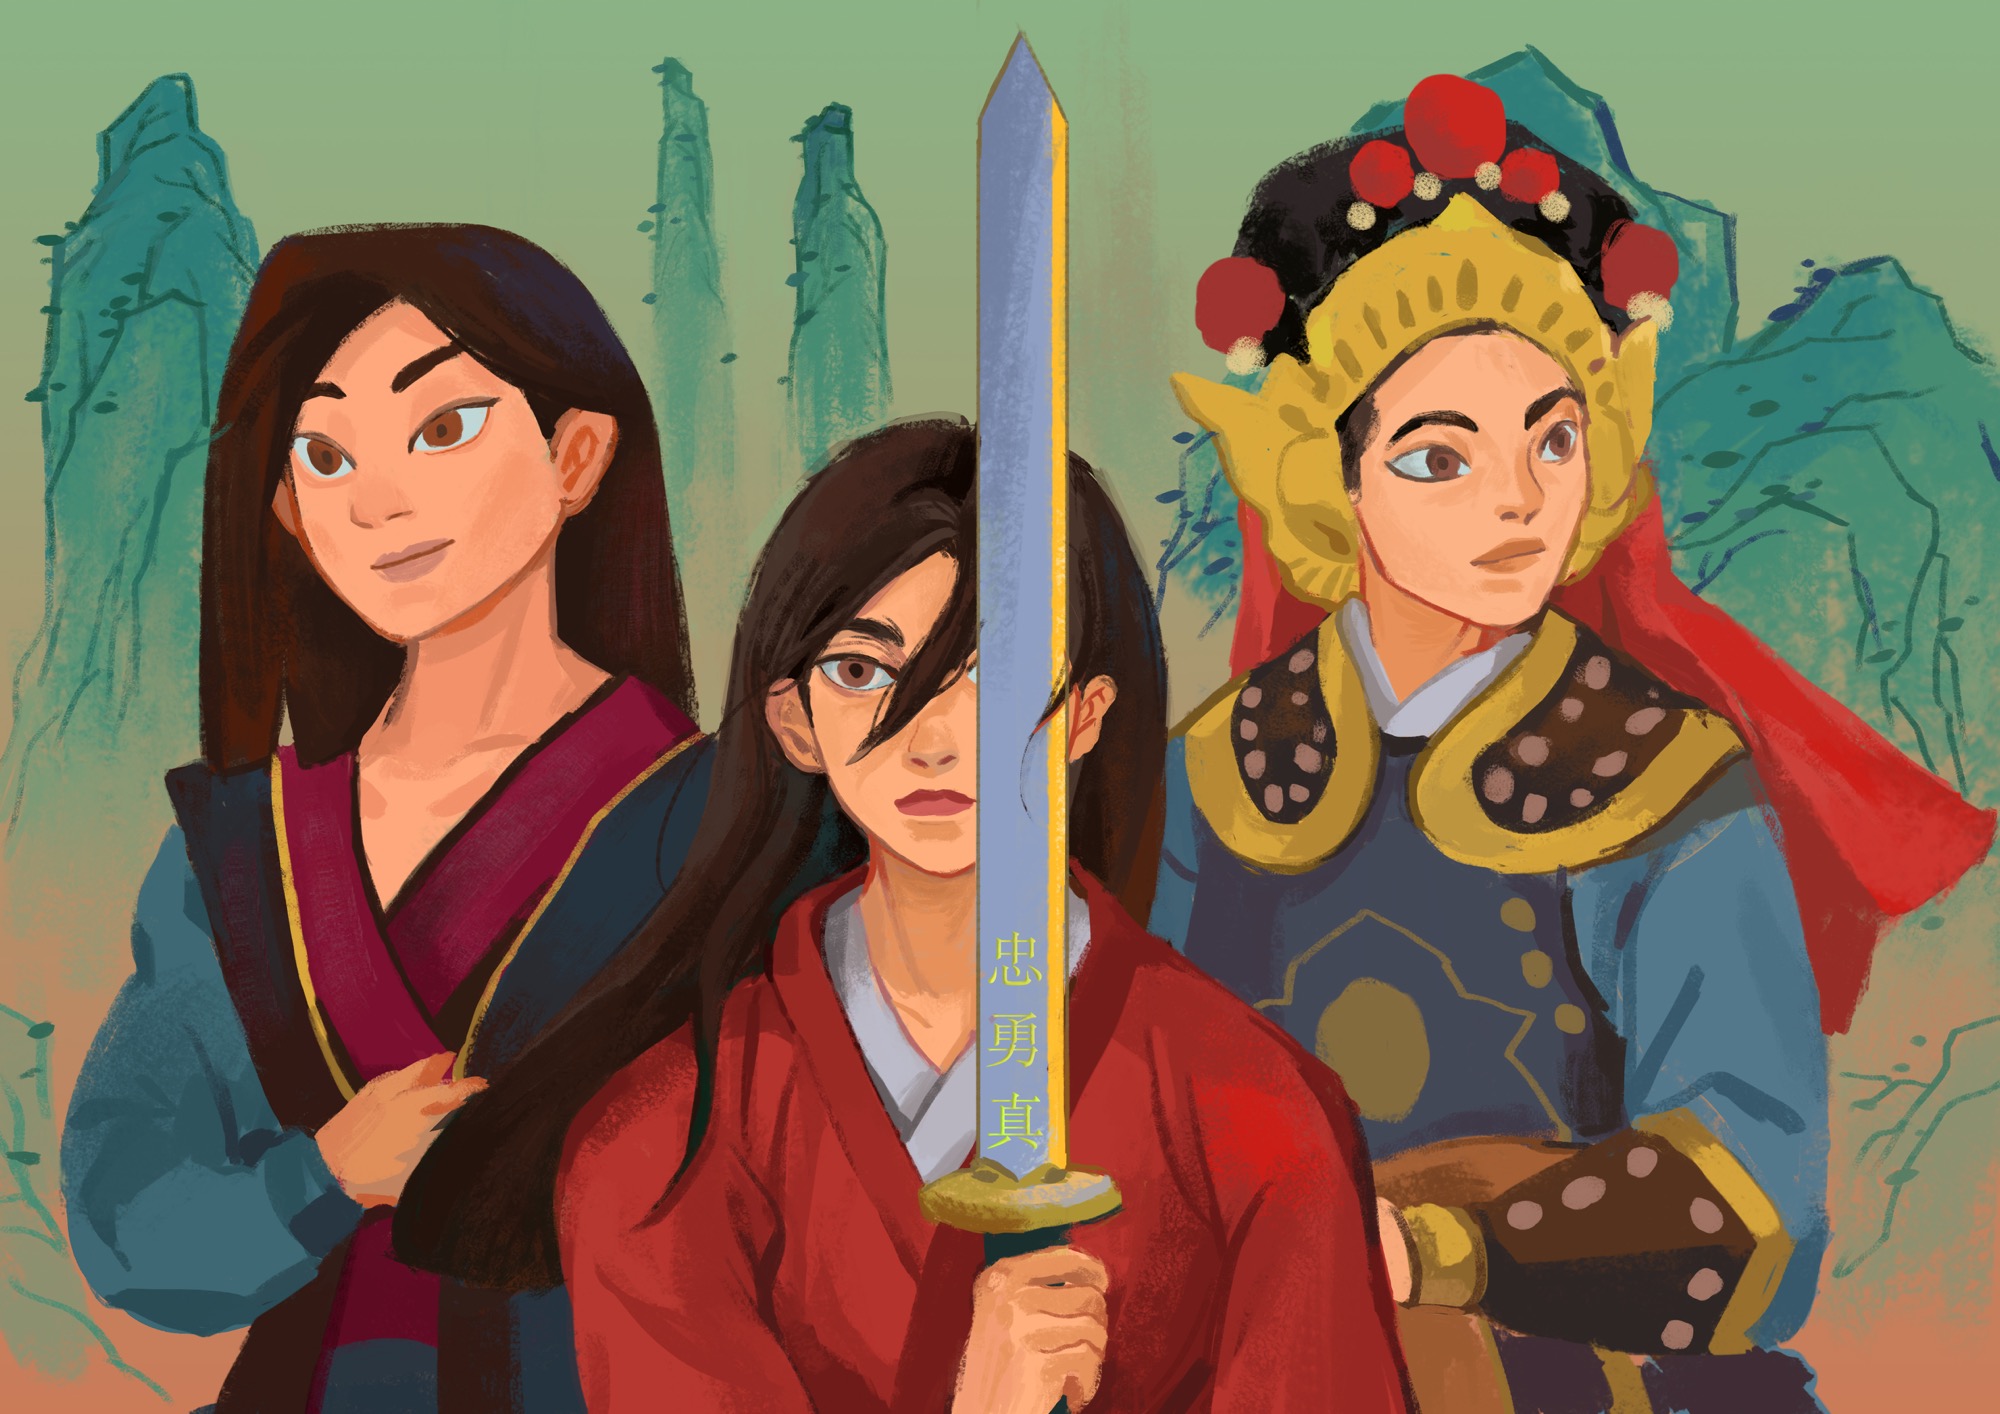 Language, gender, and patriarchy in Mulan: a diachronic analysis